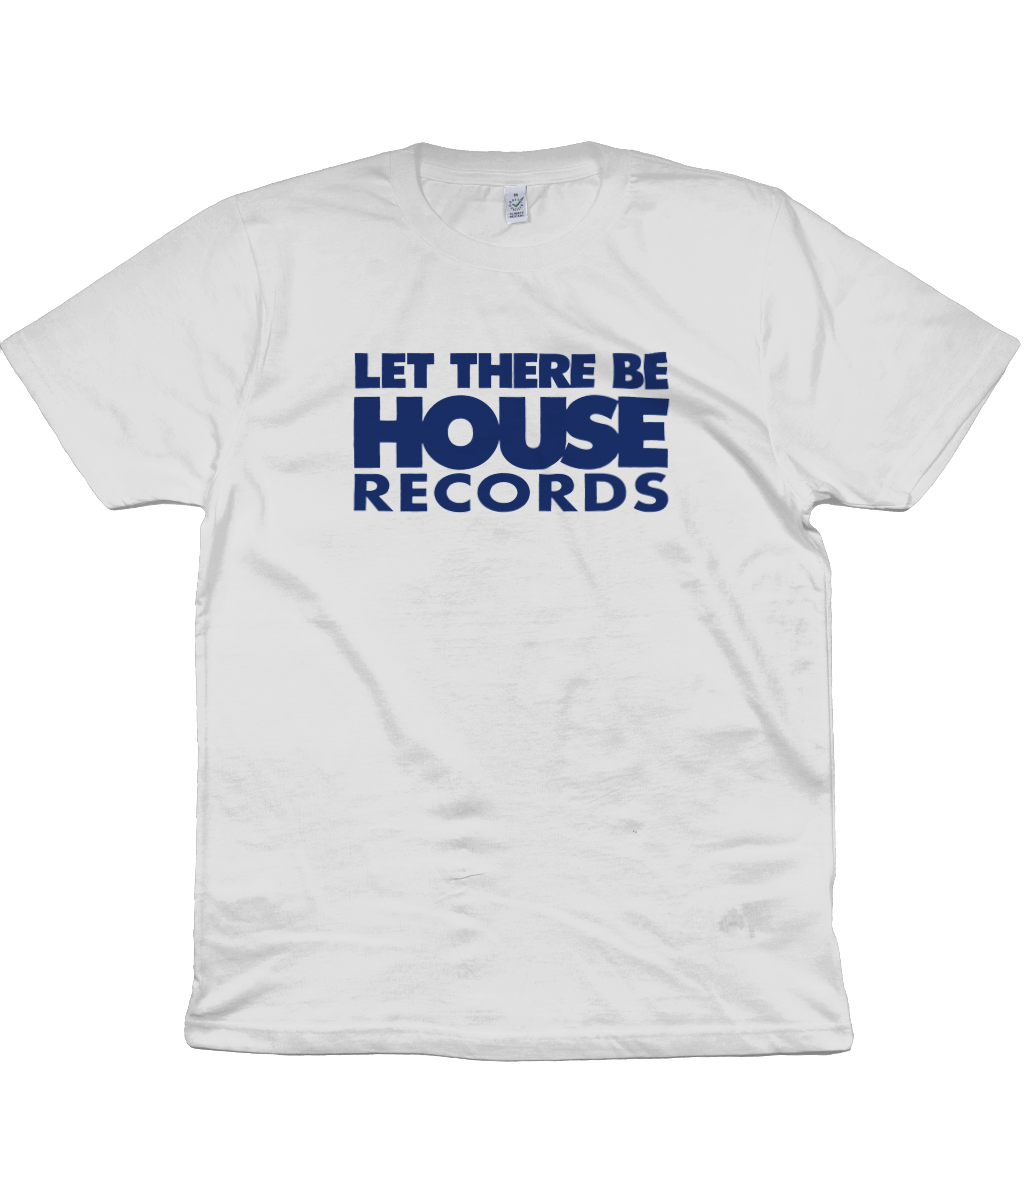 T-Shirt LTBH Records Blue